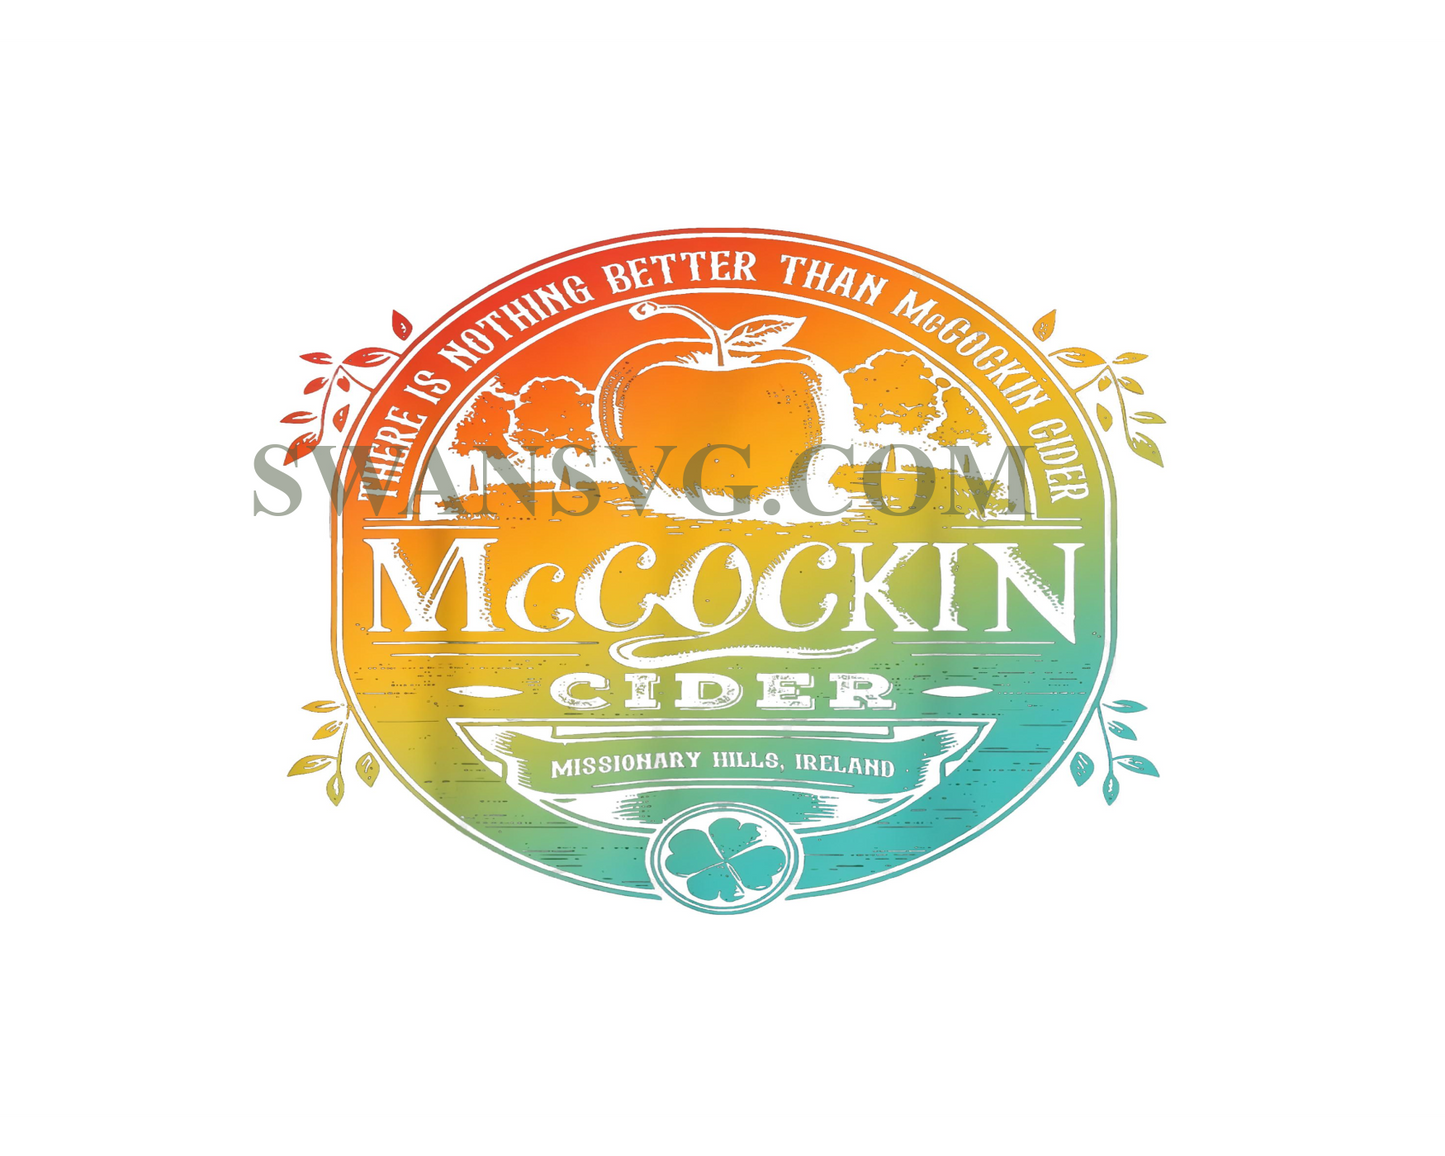 There Is Nothing png, Better Than Mccockin png, Cider Missionary Hills